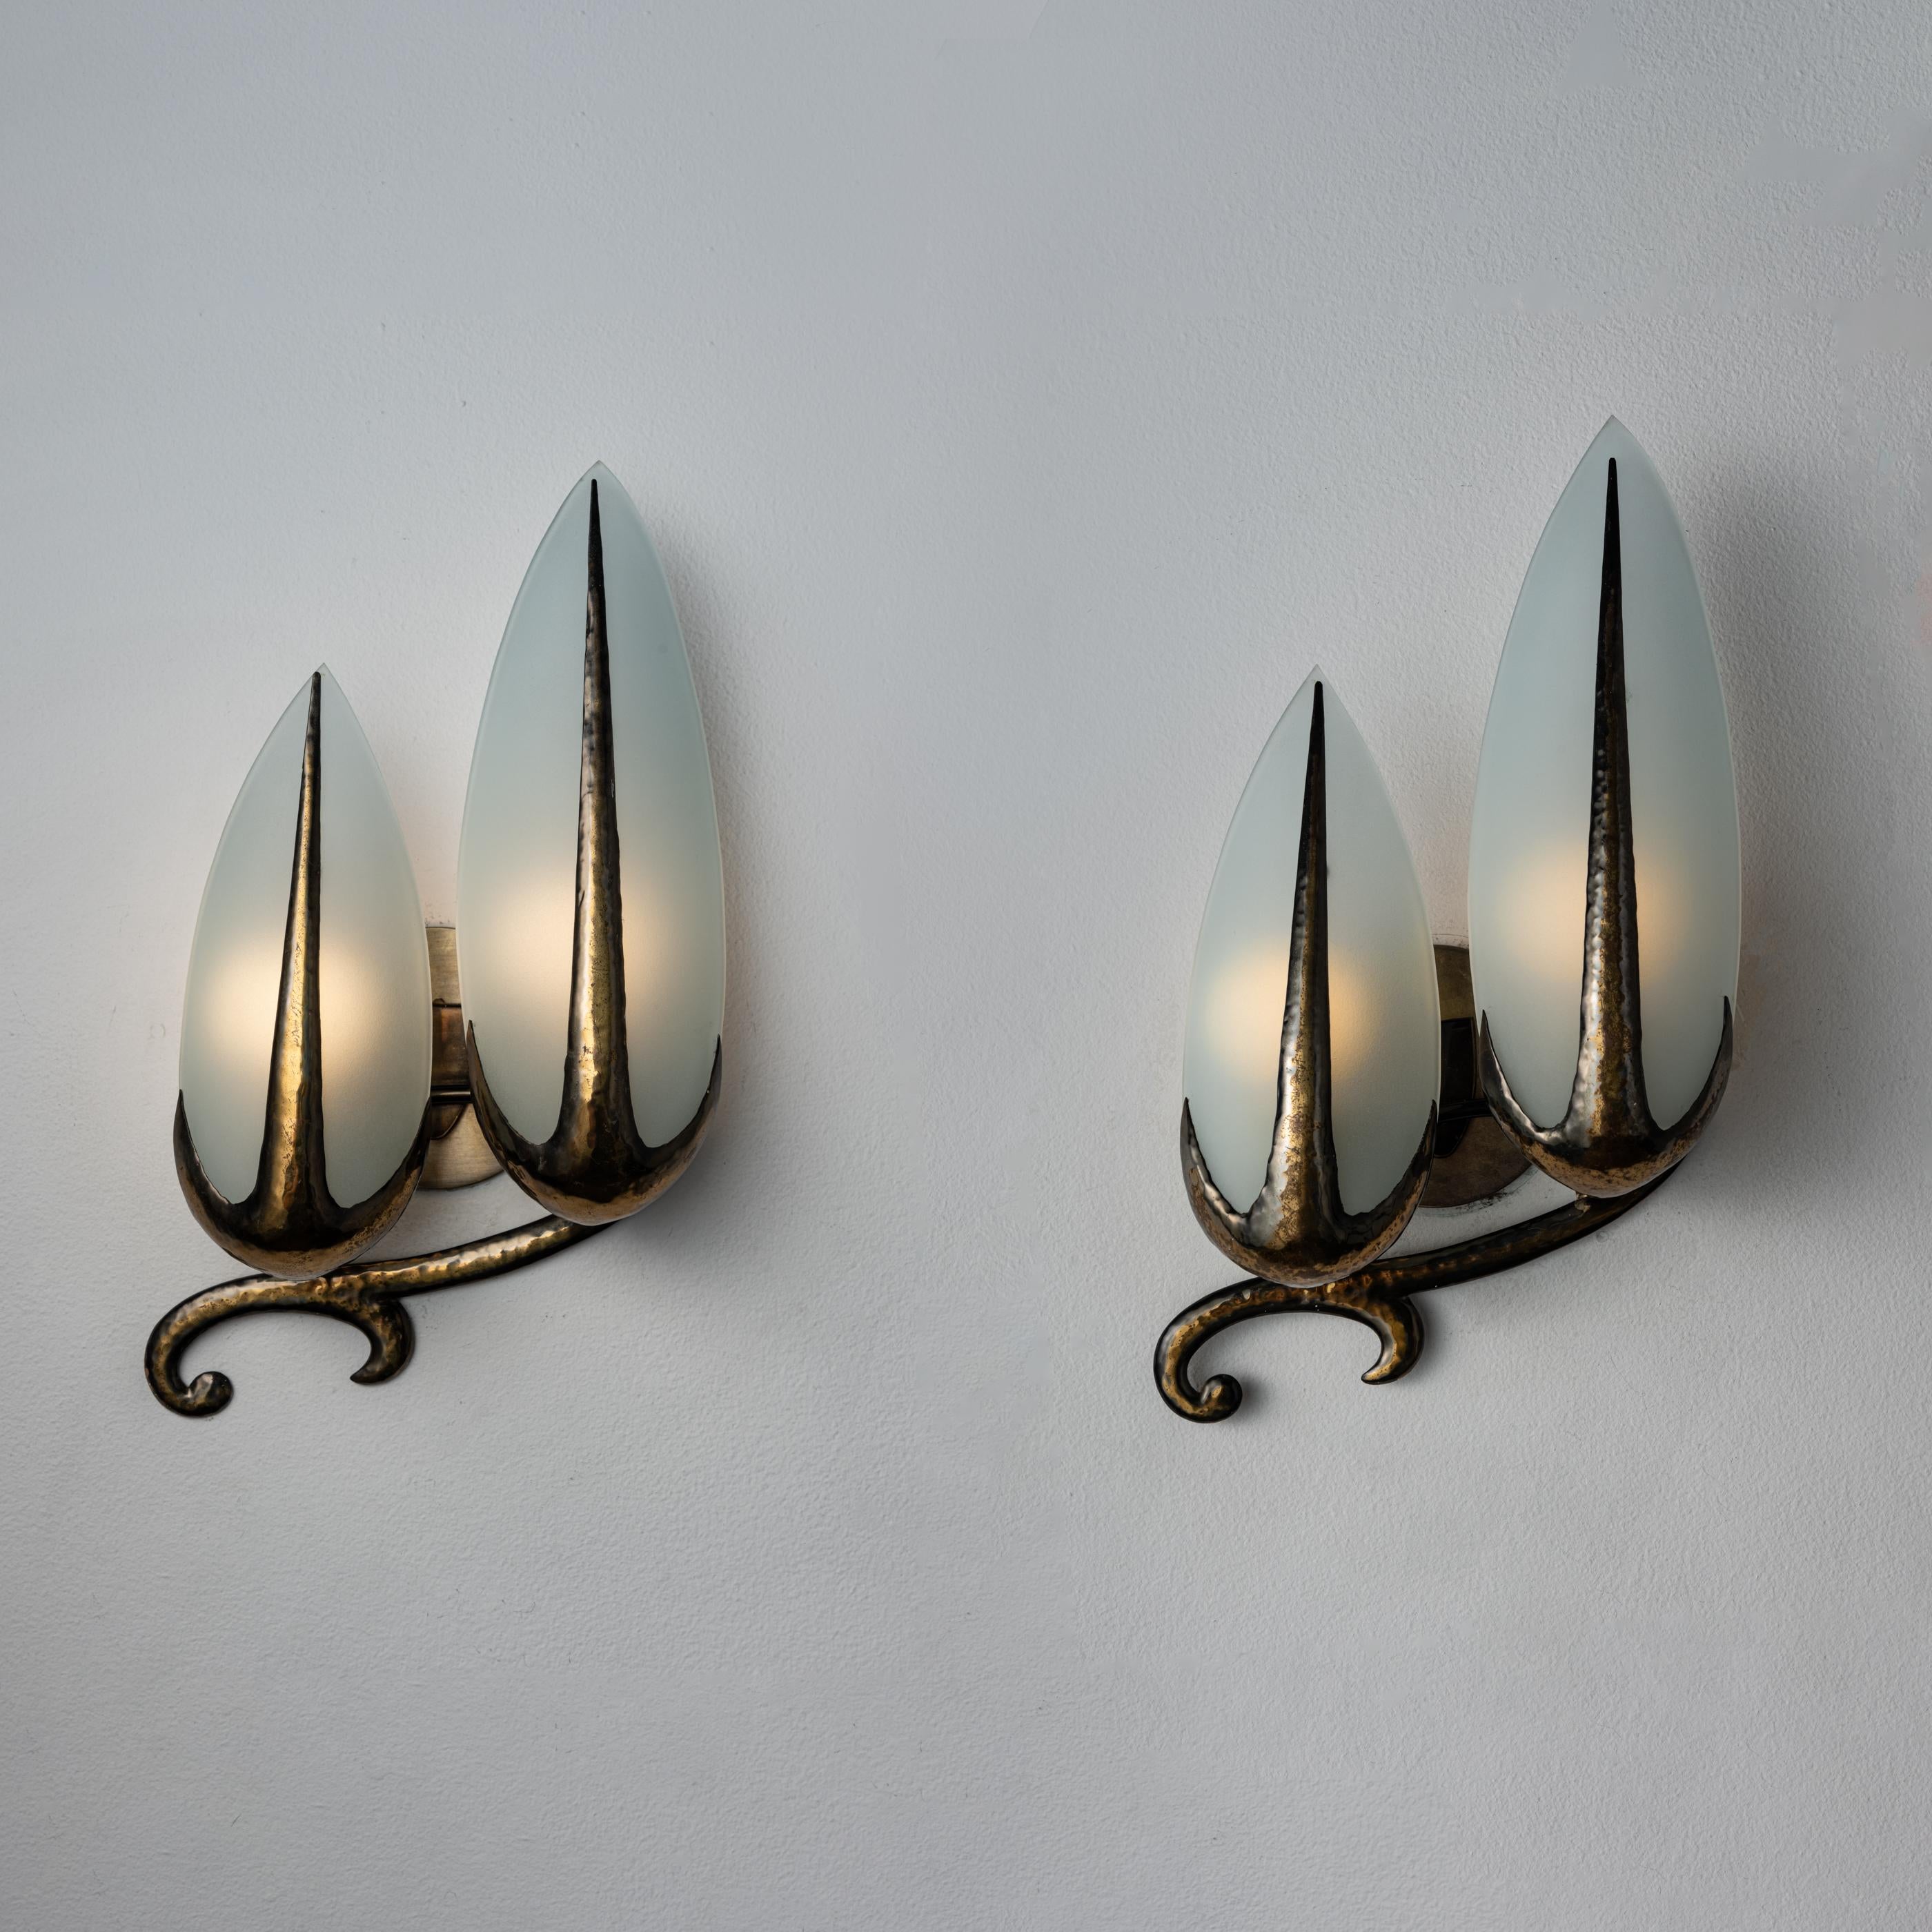 Single Custom Italian Mfg. sconce. Manufactured in Italy, circa 1940's. Brass and opaline glass. Rewired for U.S. standards. Custom brass backplates. We recommend two E14 candelabra bulbs per fixture. Bulbs not included. Priced and sold